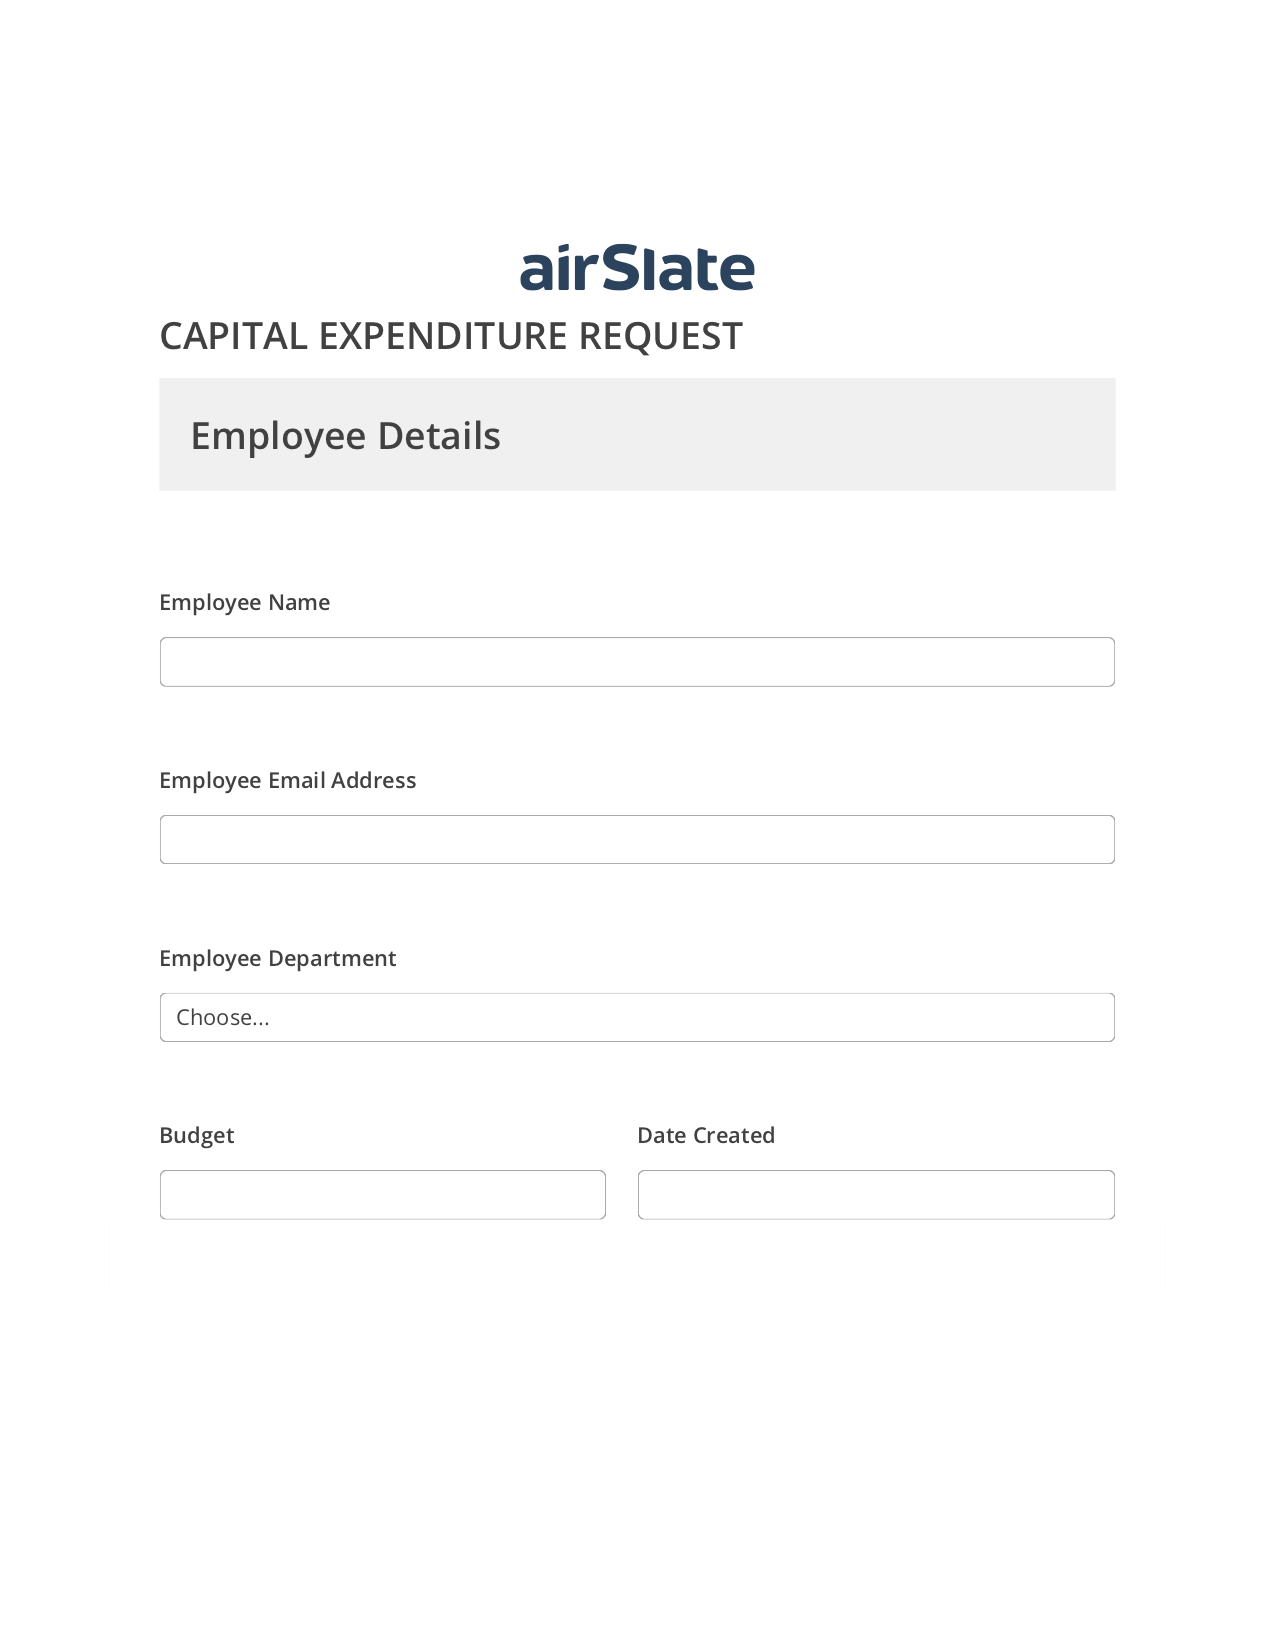 Capital Expenditure Request Approval Flow Invoke Salesforce Process Bot